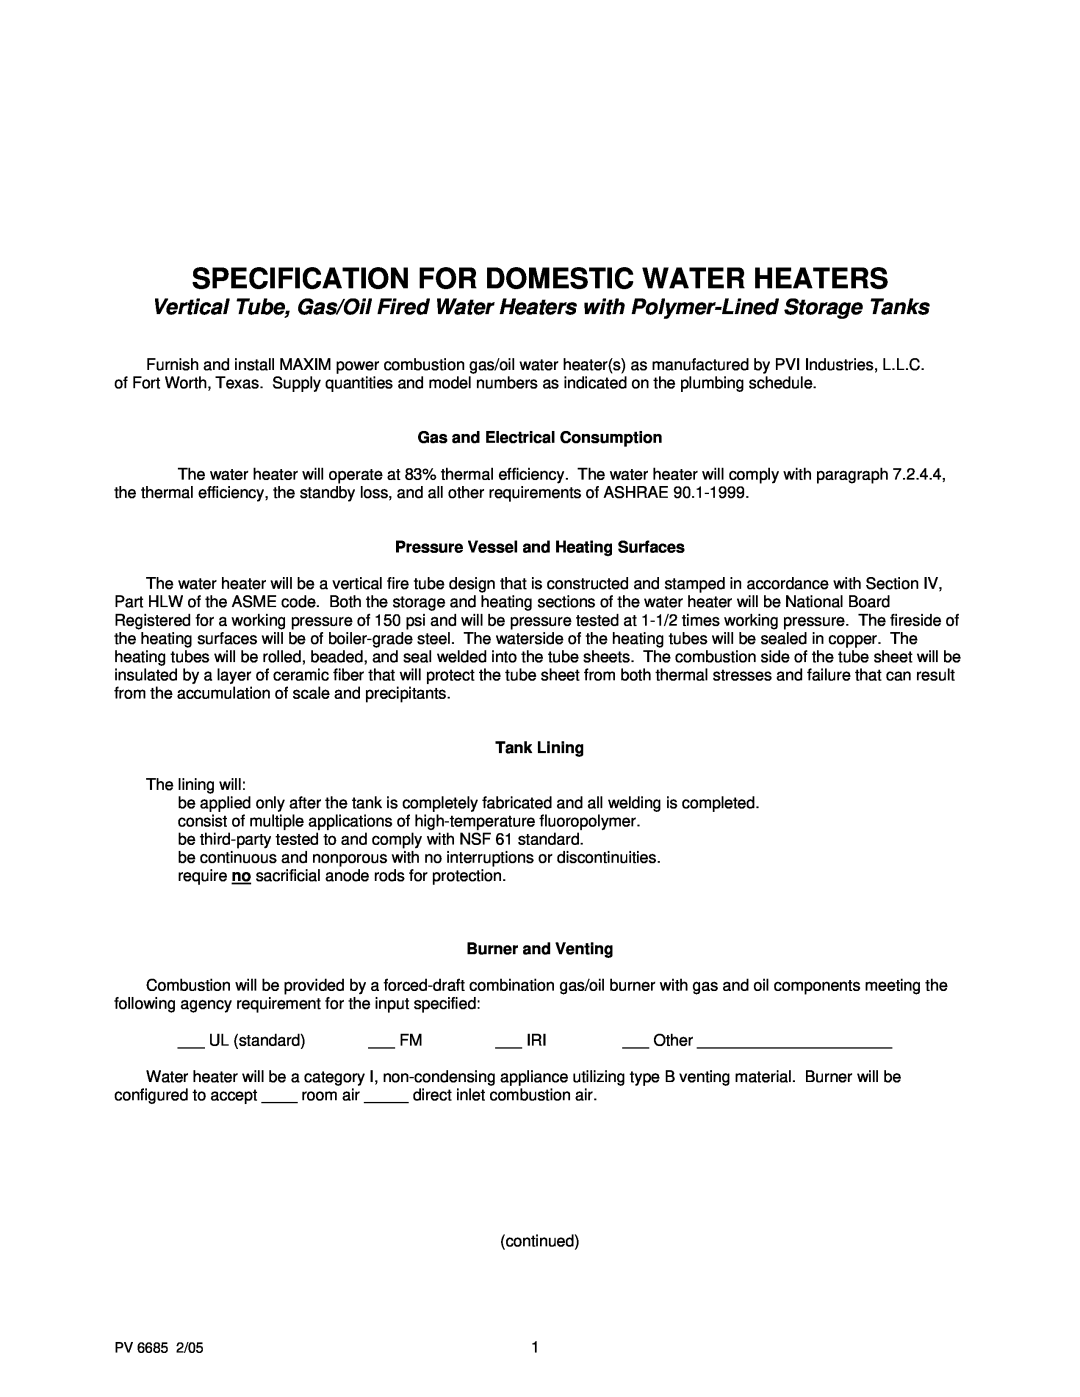 PVI Industries PV 6685 2/05 1 manual Specification For Domestic Water Heaters, Gas and Electrical Consumption, Tank Lining 